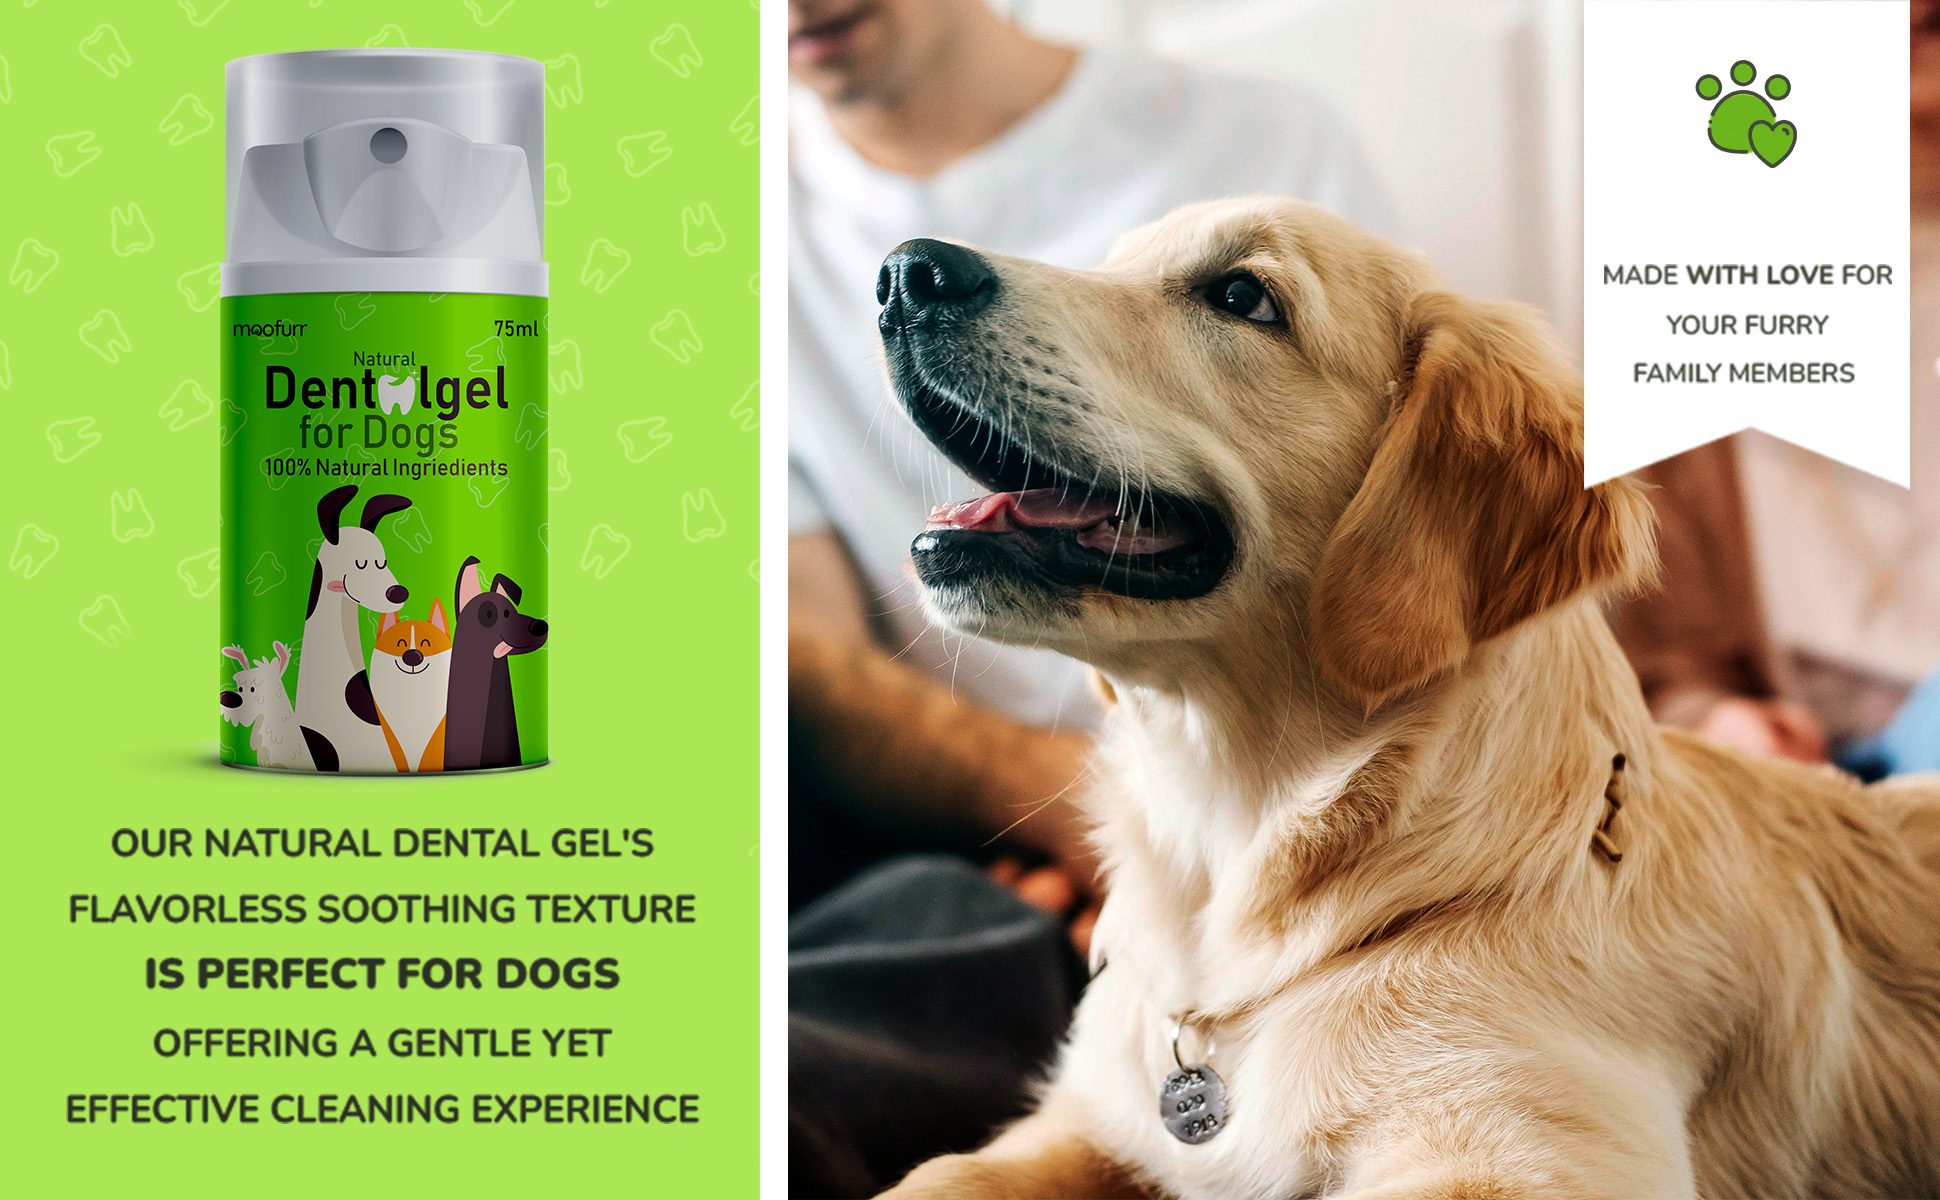 Moofurr natural dental gel's for Dogs Flavorless soothing texture is perfect for dogs Offering a gentle yet Effective cleaning experience